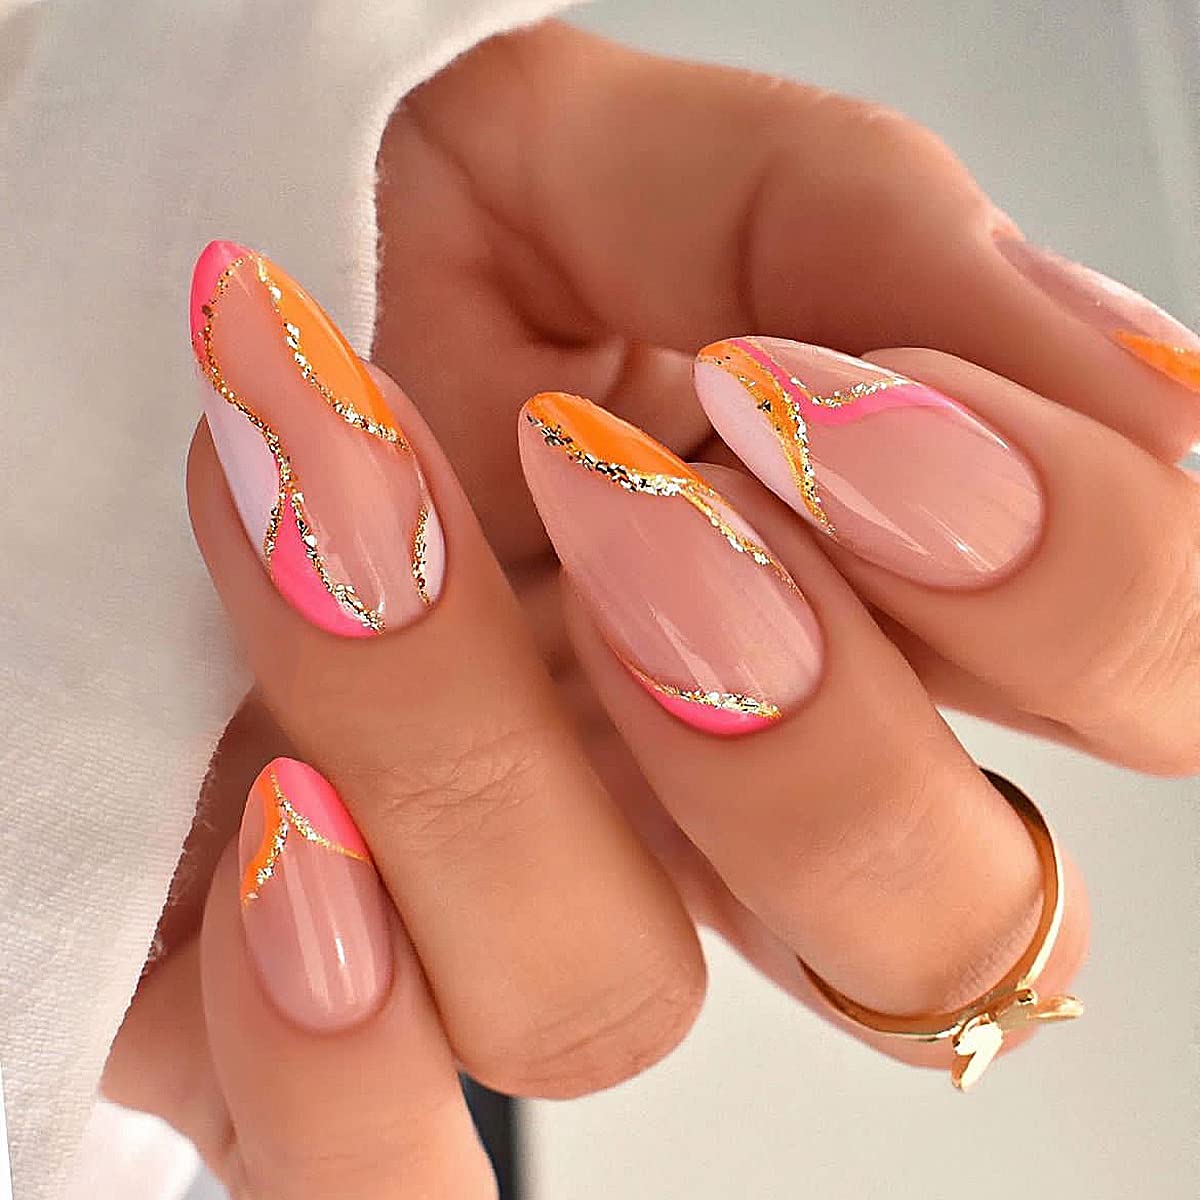 15 Fresh Design Ideas for Almond-Shaped Nails